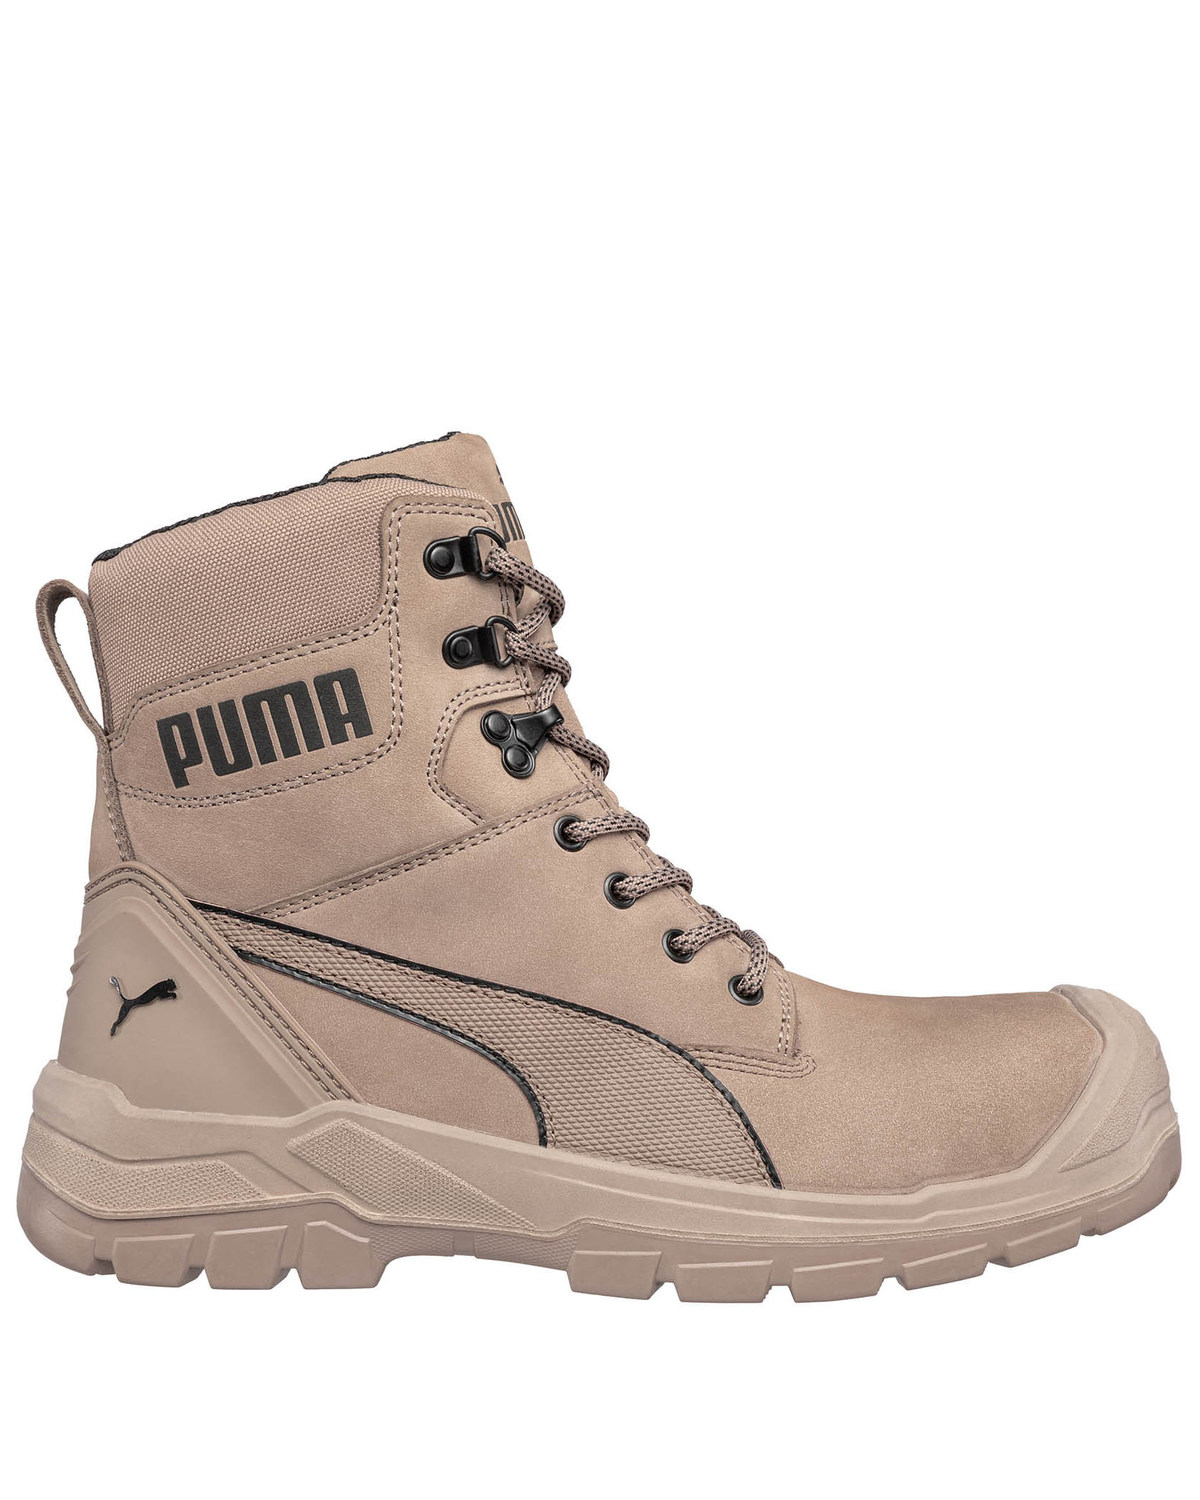 Puma Safety Men's Conquest Waterproof Work Boots - Composite Toe